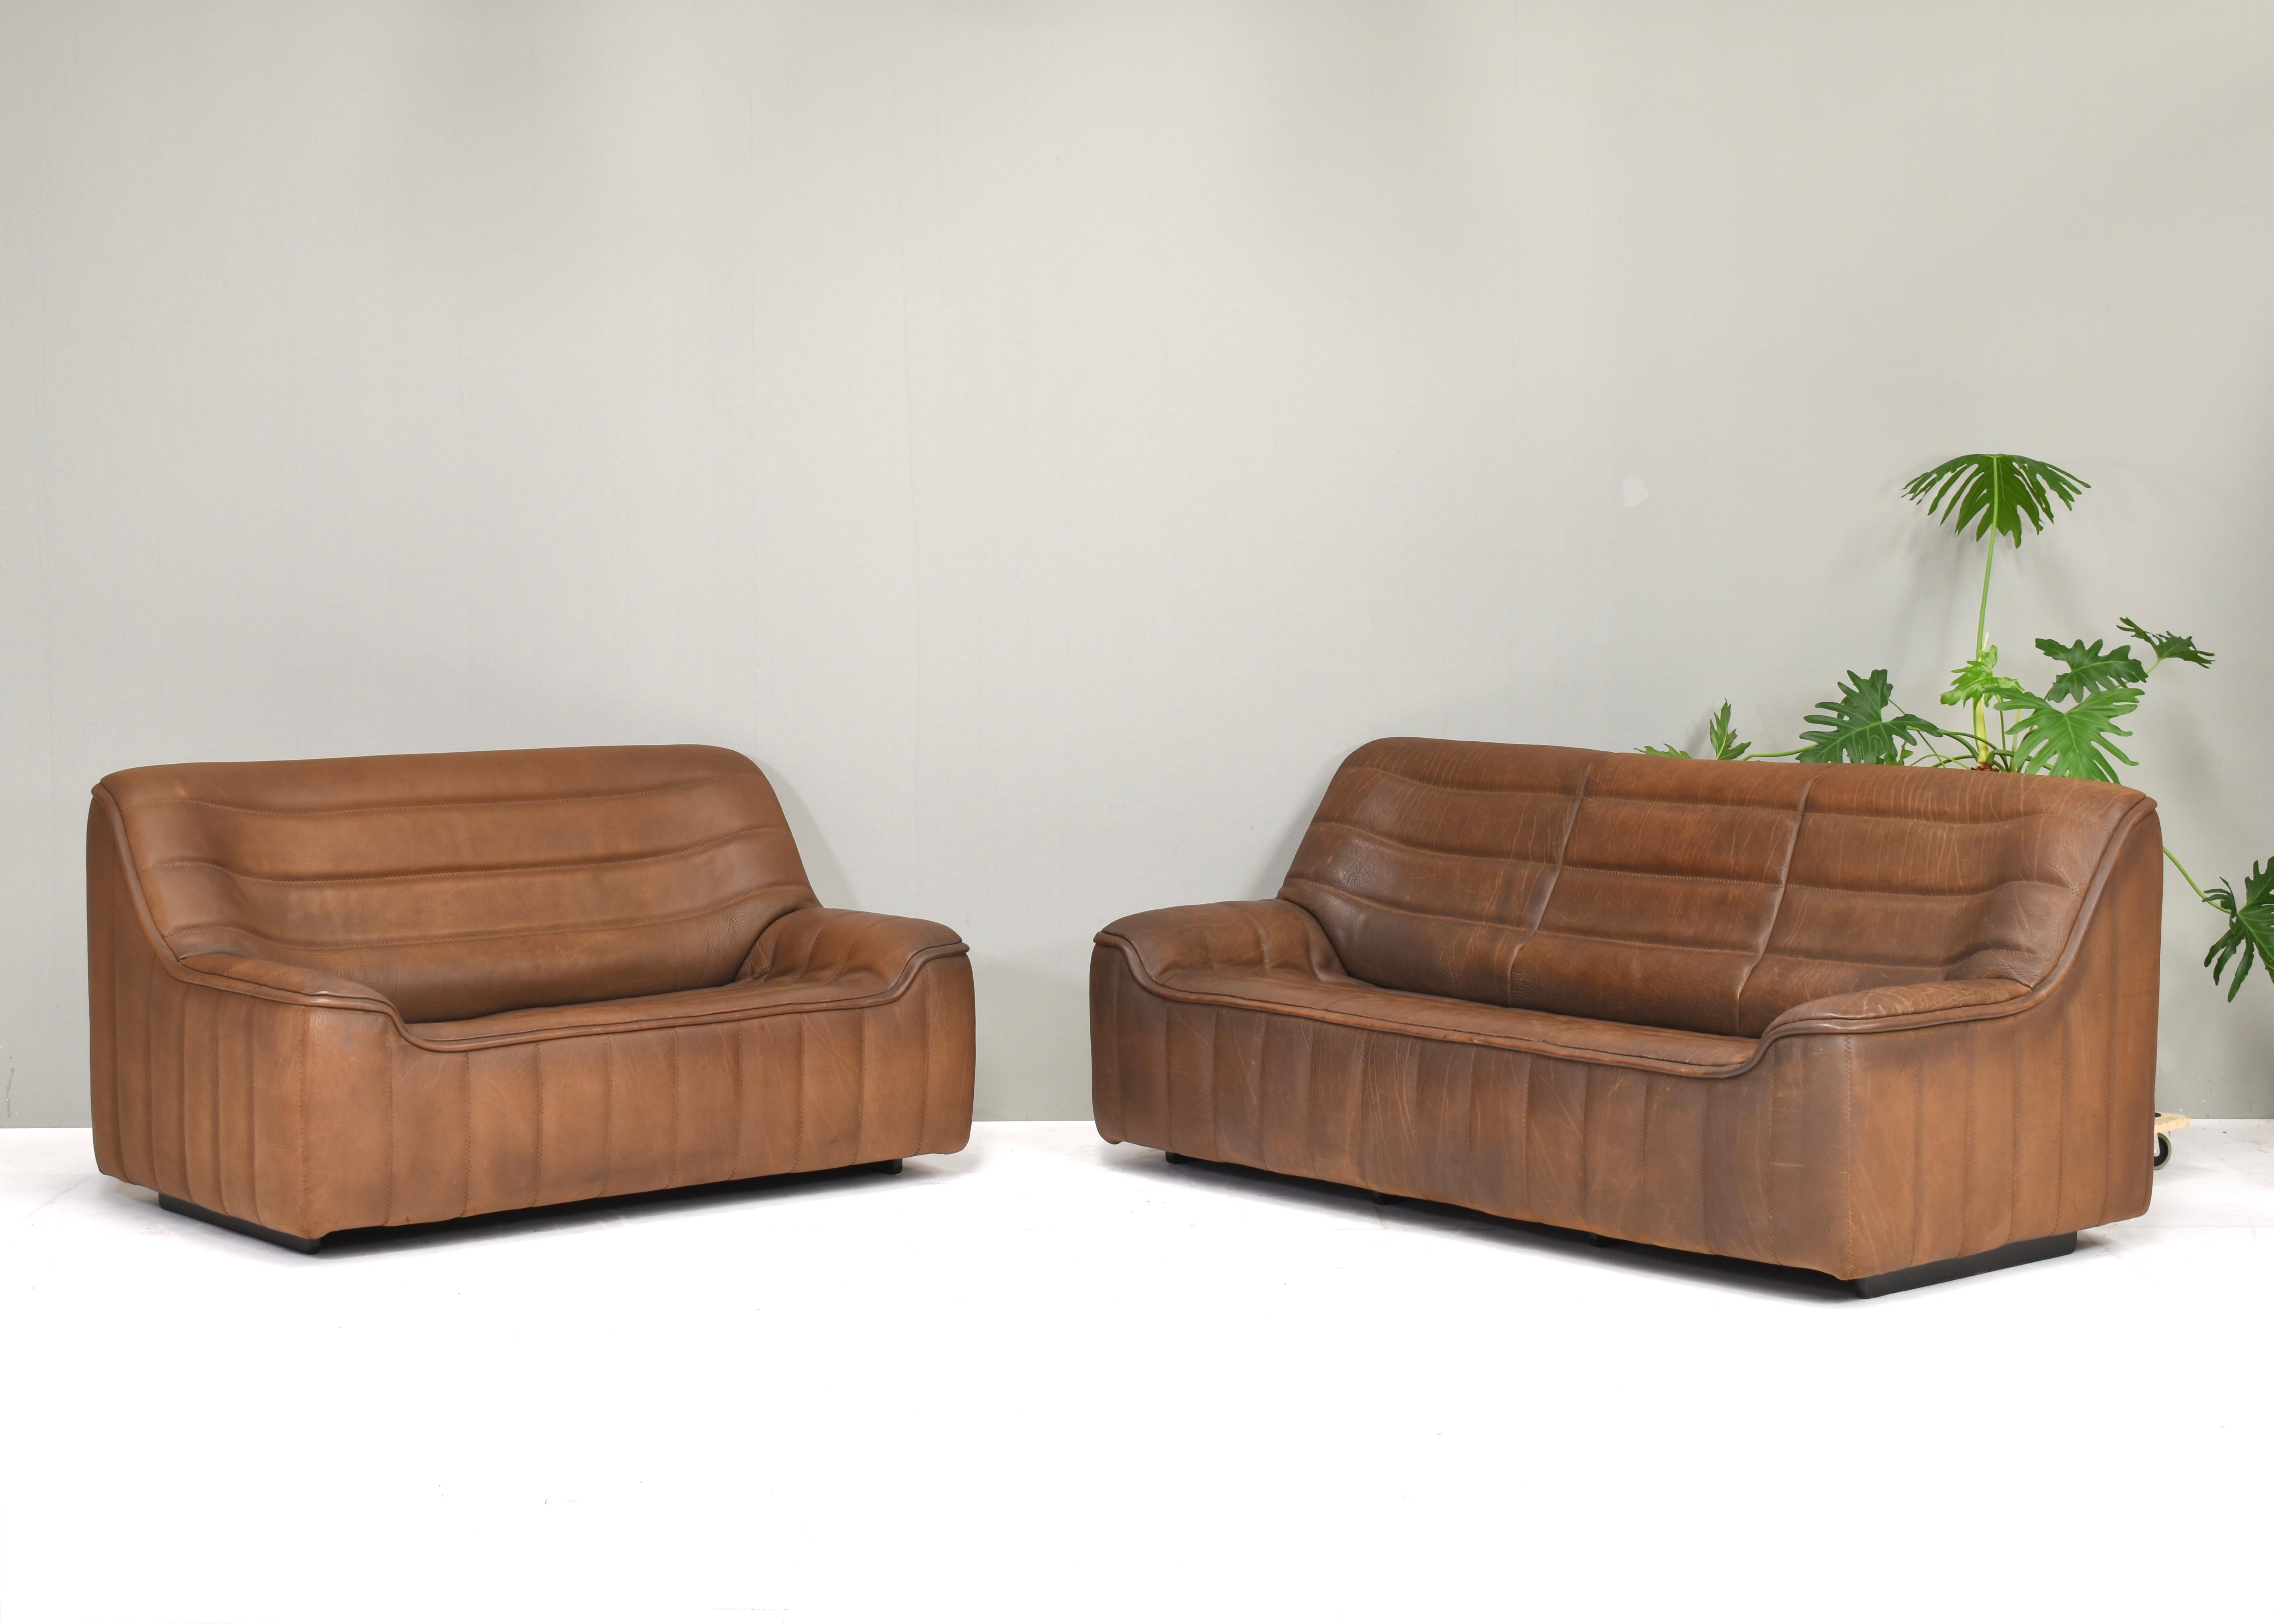 De Sede DS-84 Living room set in Tan Buffalo leather – Switzerland, circa 1970 For Sale 8